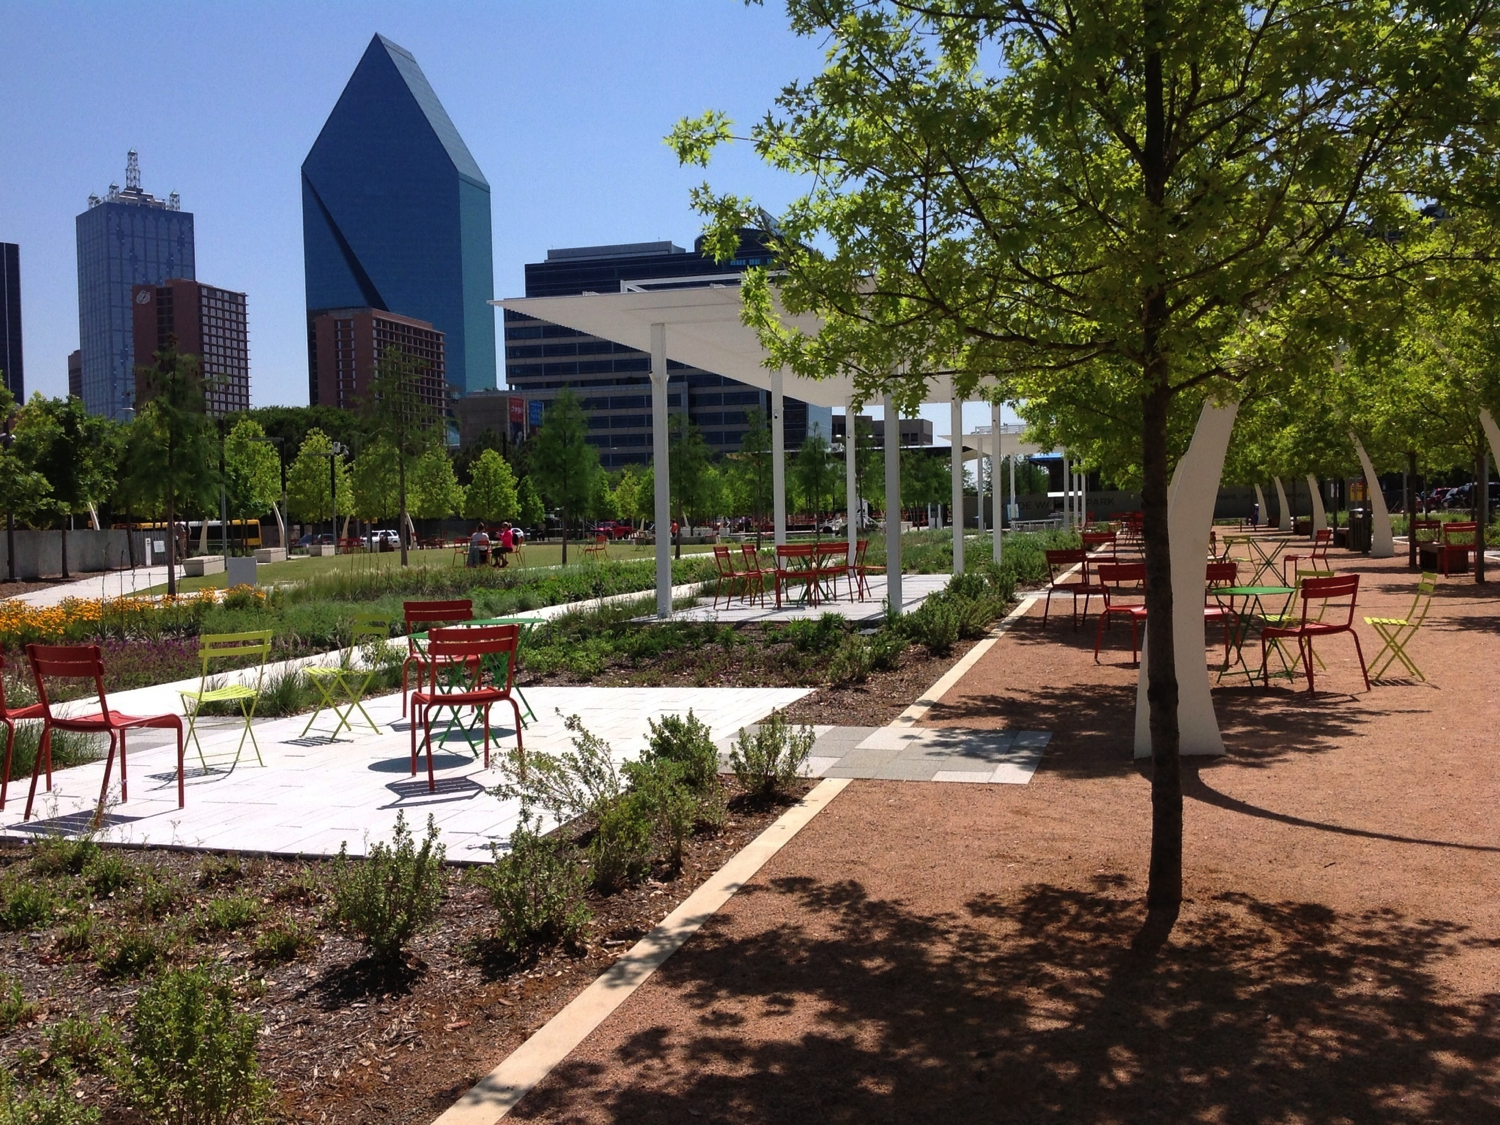 Sunny Day at Klyde Warren Park by Kevin 1086 via Wikimedia Commons (CC BY-SA 3.0)